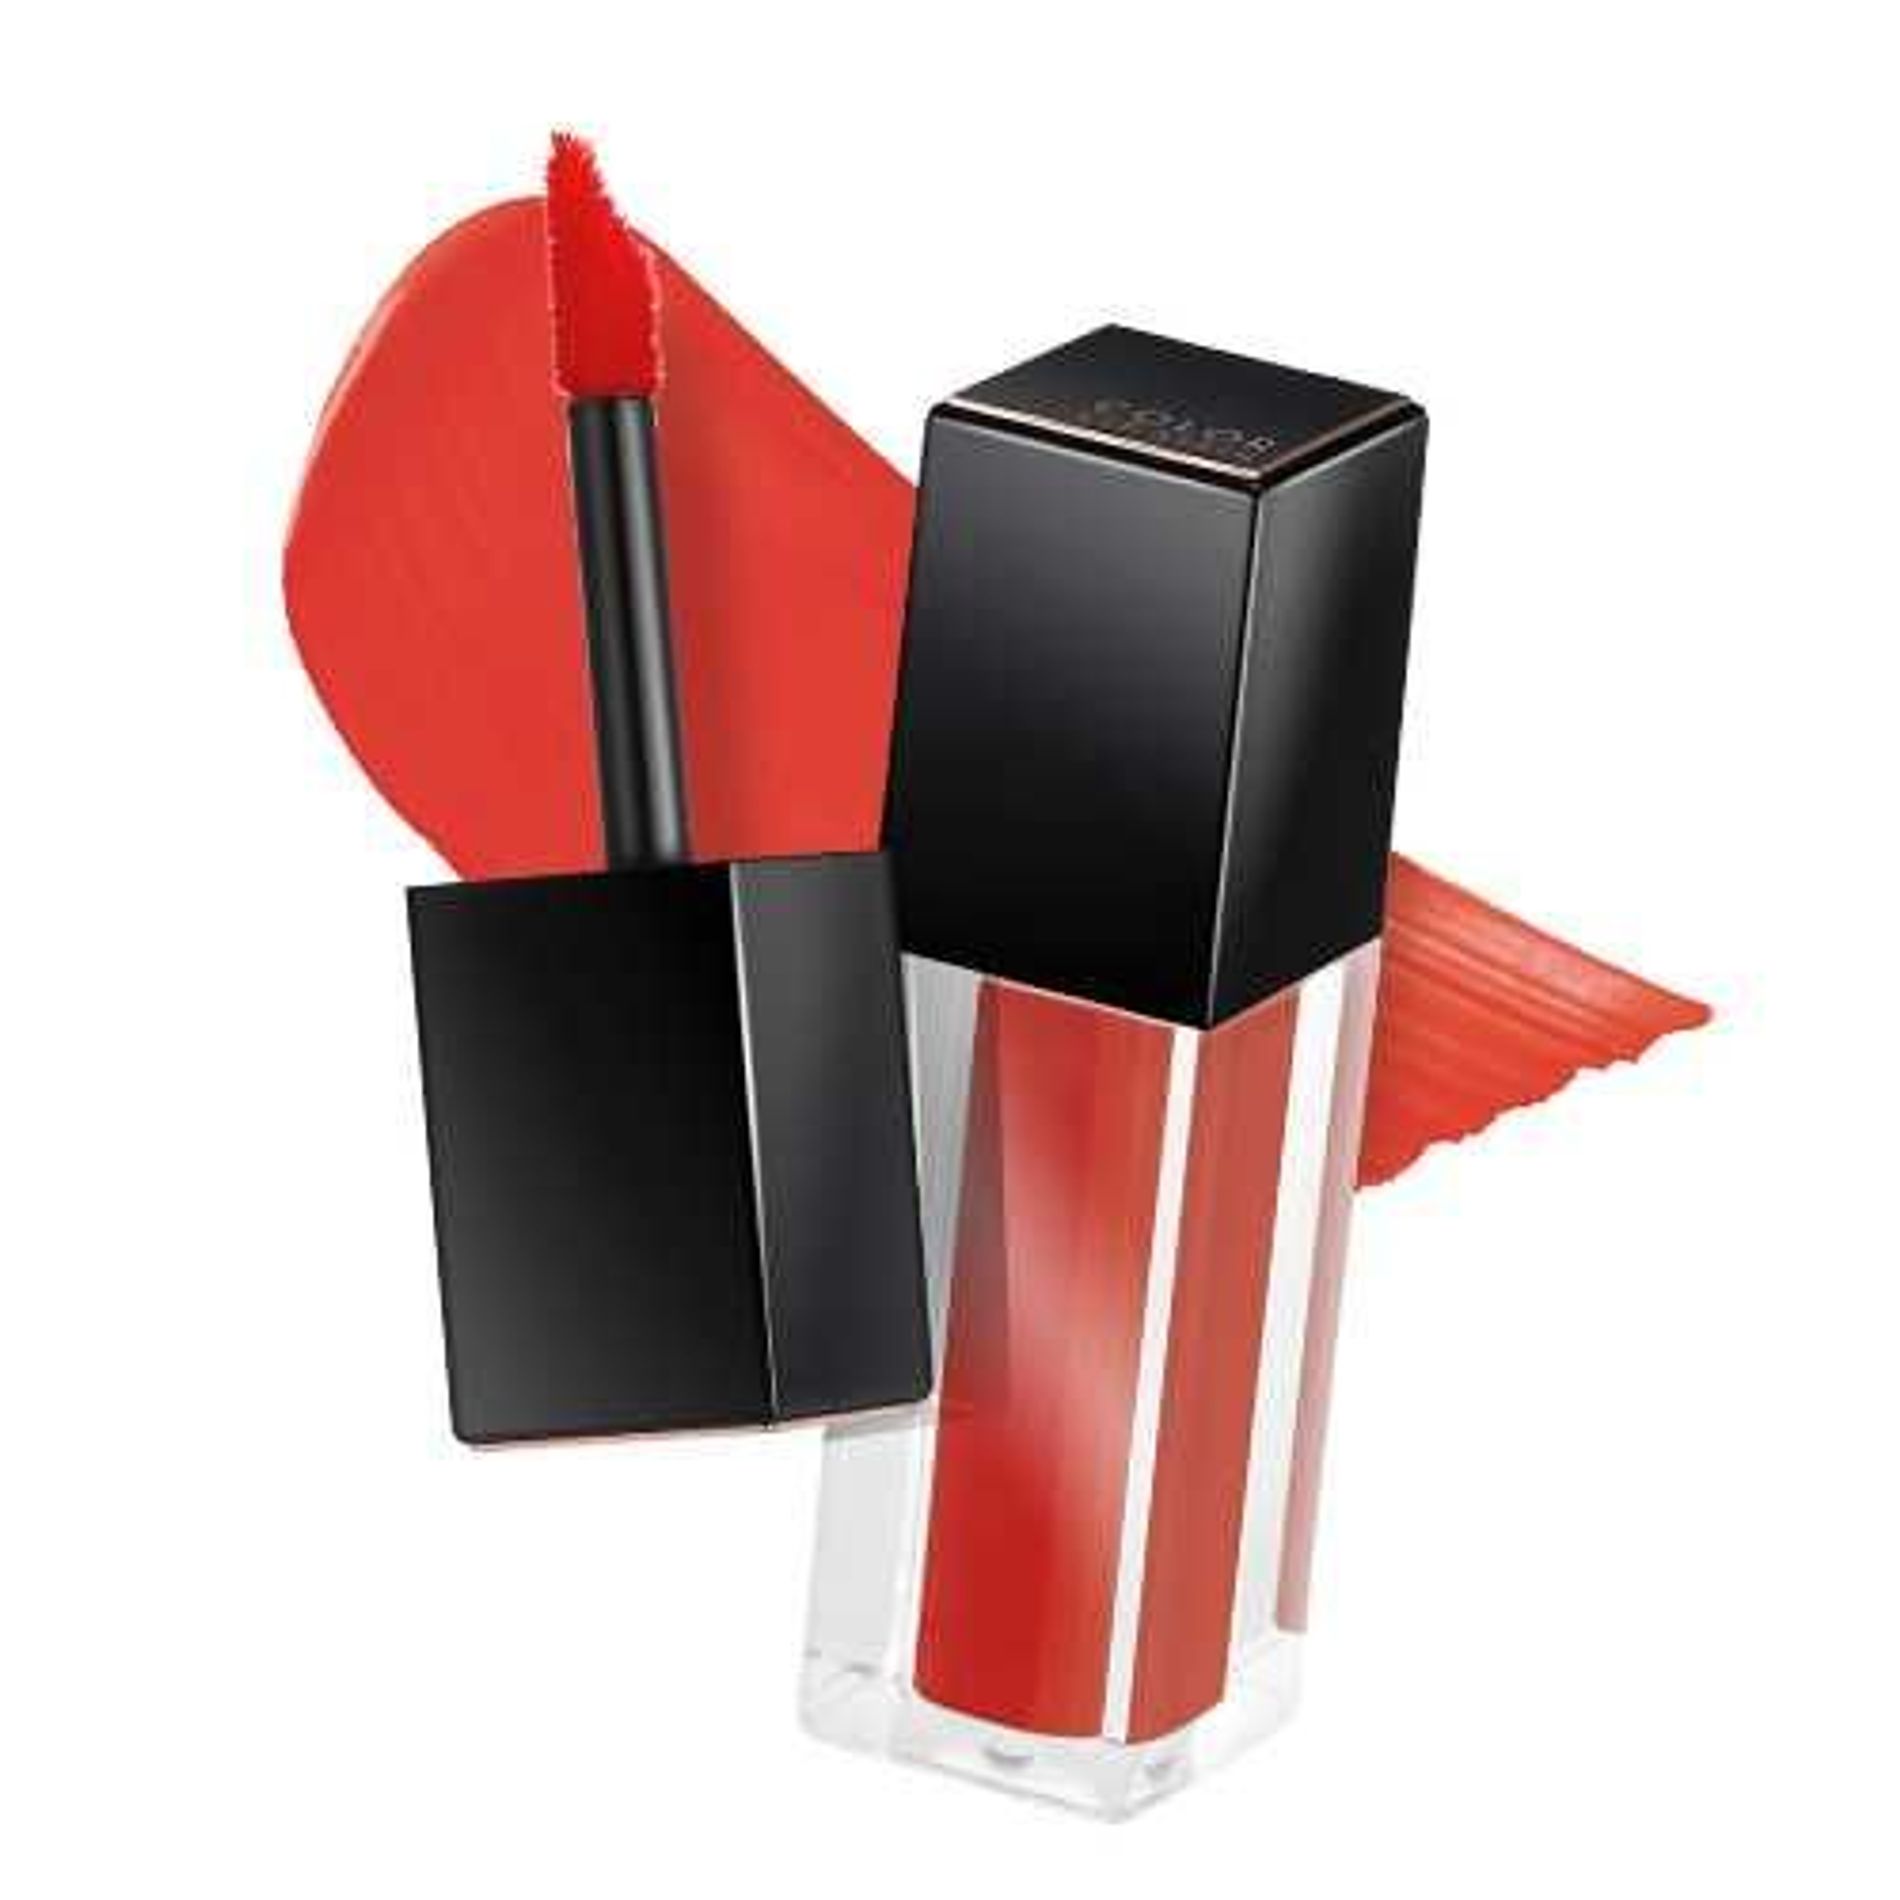 son-tint-hieu-ung-bong-a-pieu-color-lip-stain-gel-tint-cr05-from-now-on-2